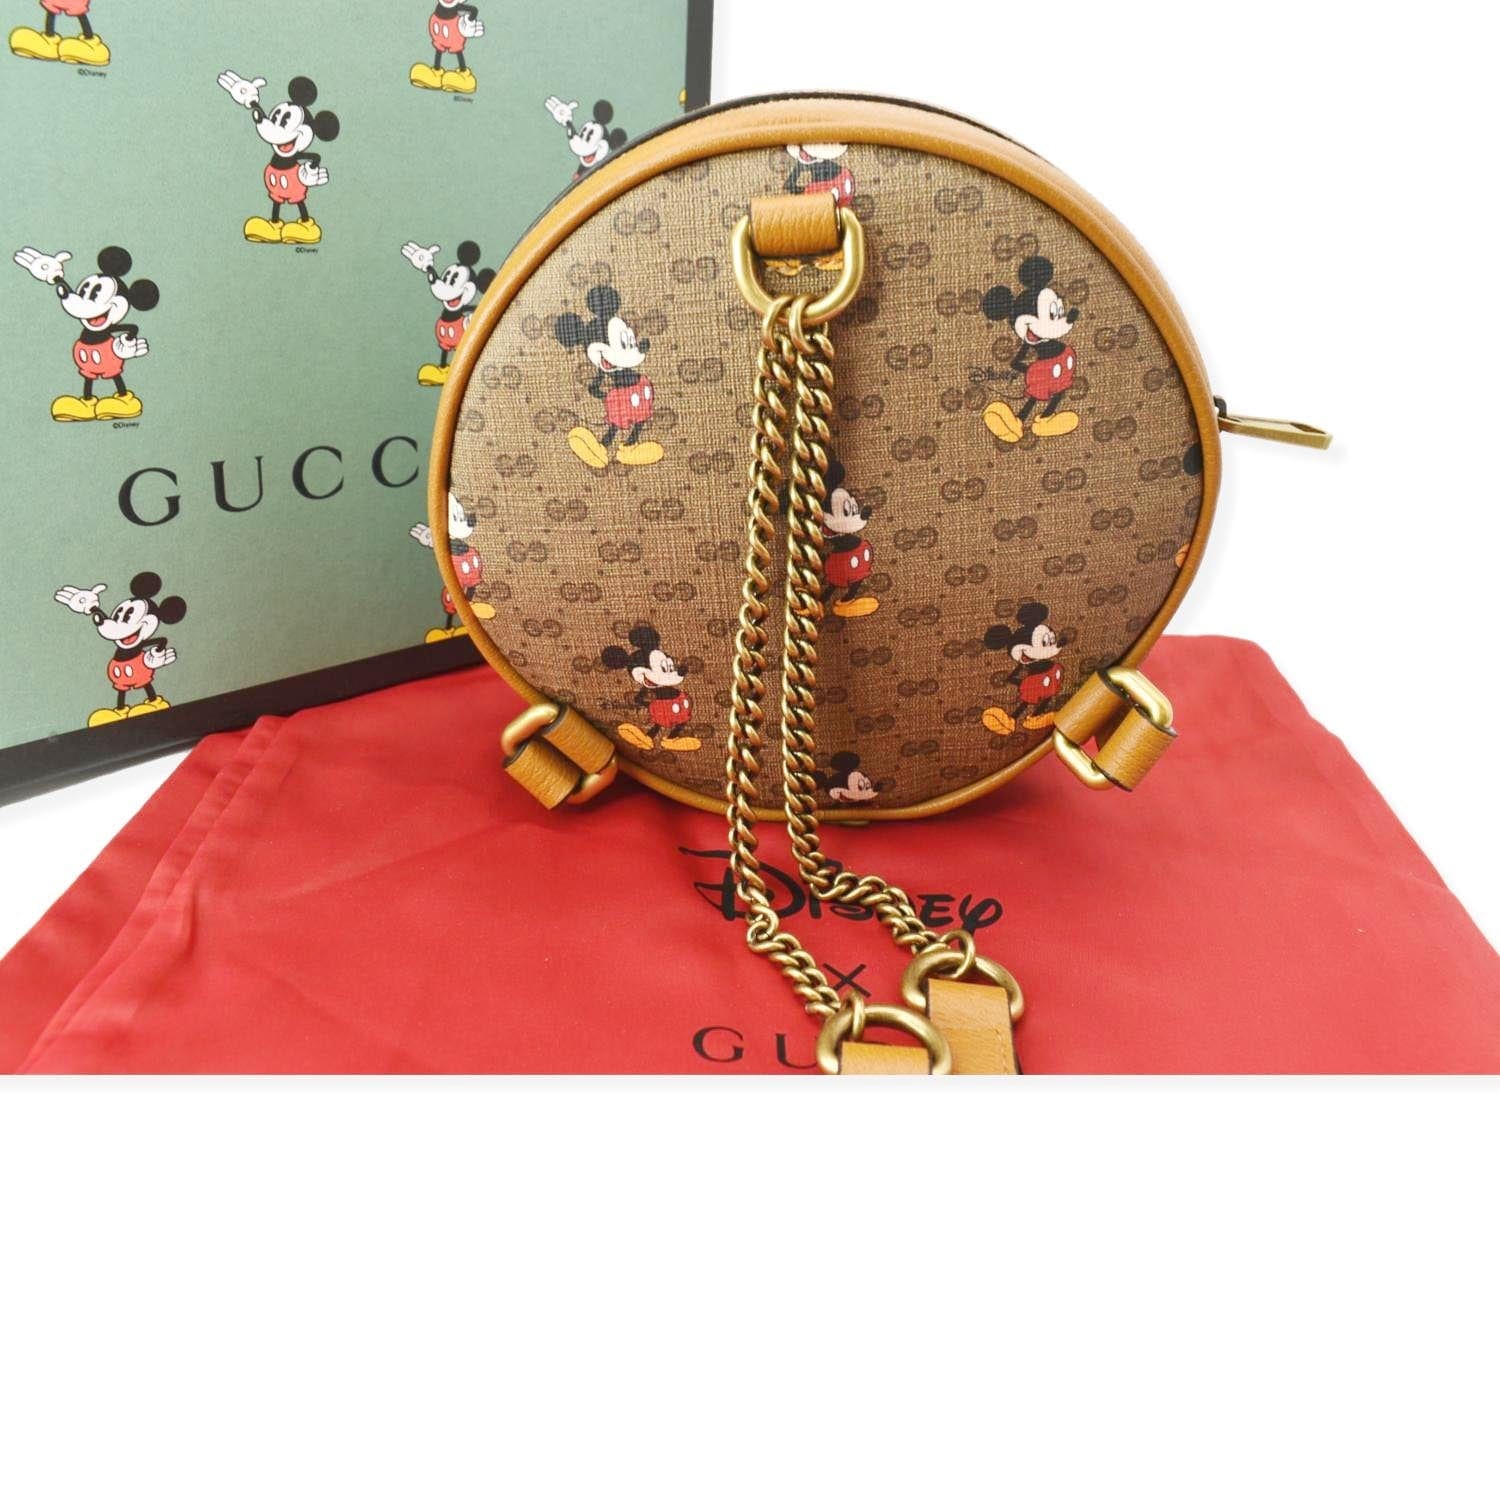 GUCCI DISNEY MICKEY MOUSE BAG -BRAND NEW, AUTHENTIC, LIMITED